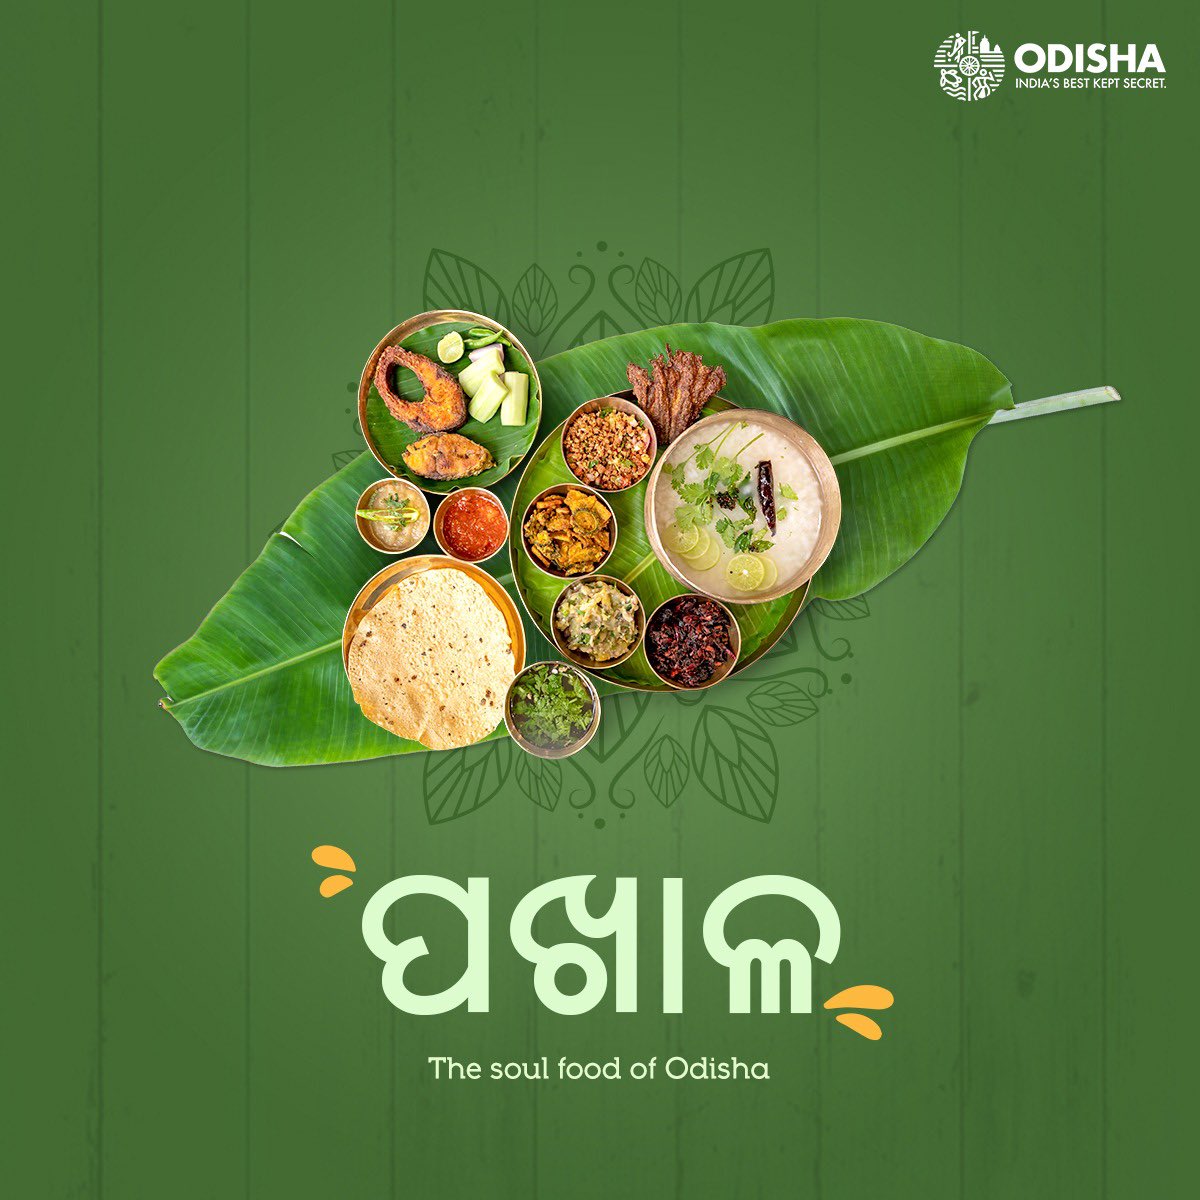 With the mercury rising, explore Odisha's way to beat the heat with a traditional #Pakhala platter. To know more, visit: odishatourism.gov.in/content/touris…